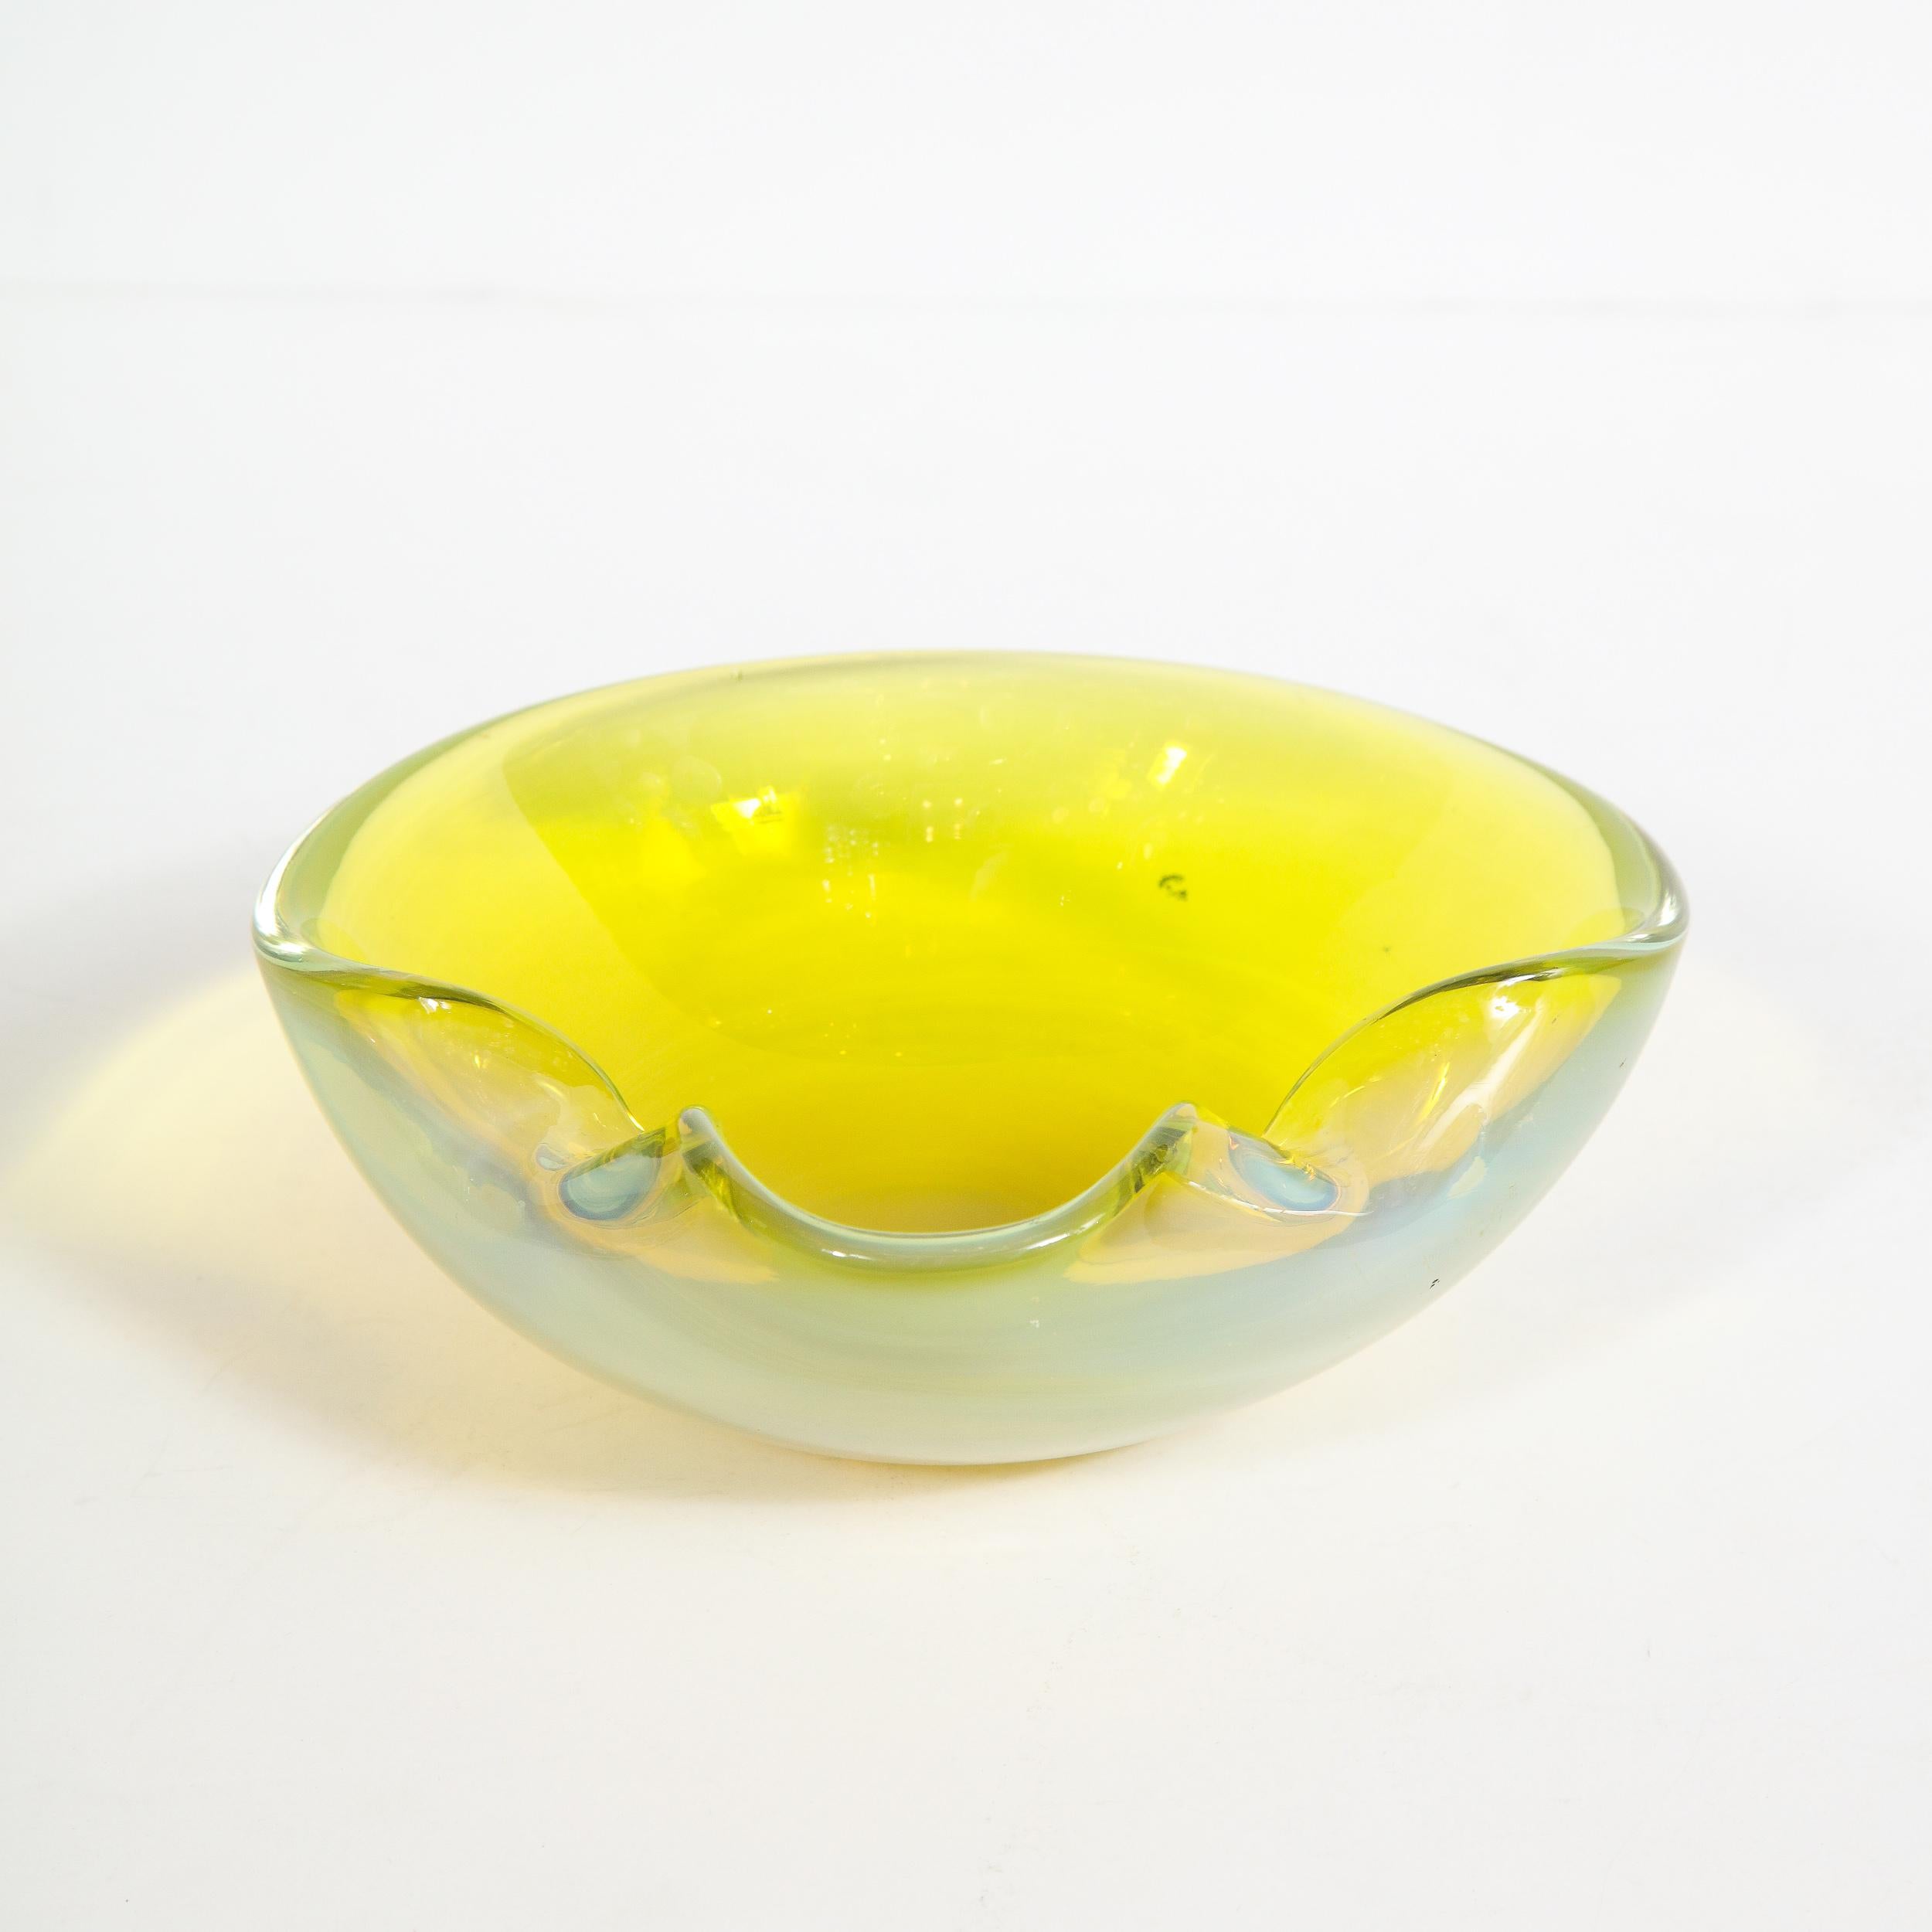 This elegant Mid-Century Modern glass vase was realized in Murano, Italy- the island off the coast of Venice renowned for centuries for its superlative glass production- circa 1950. It features a nearly circular form with scalloped sides that have